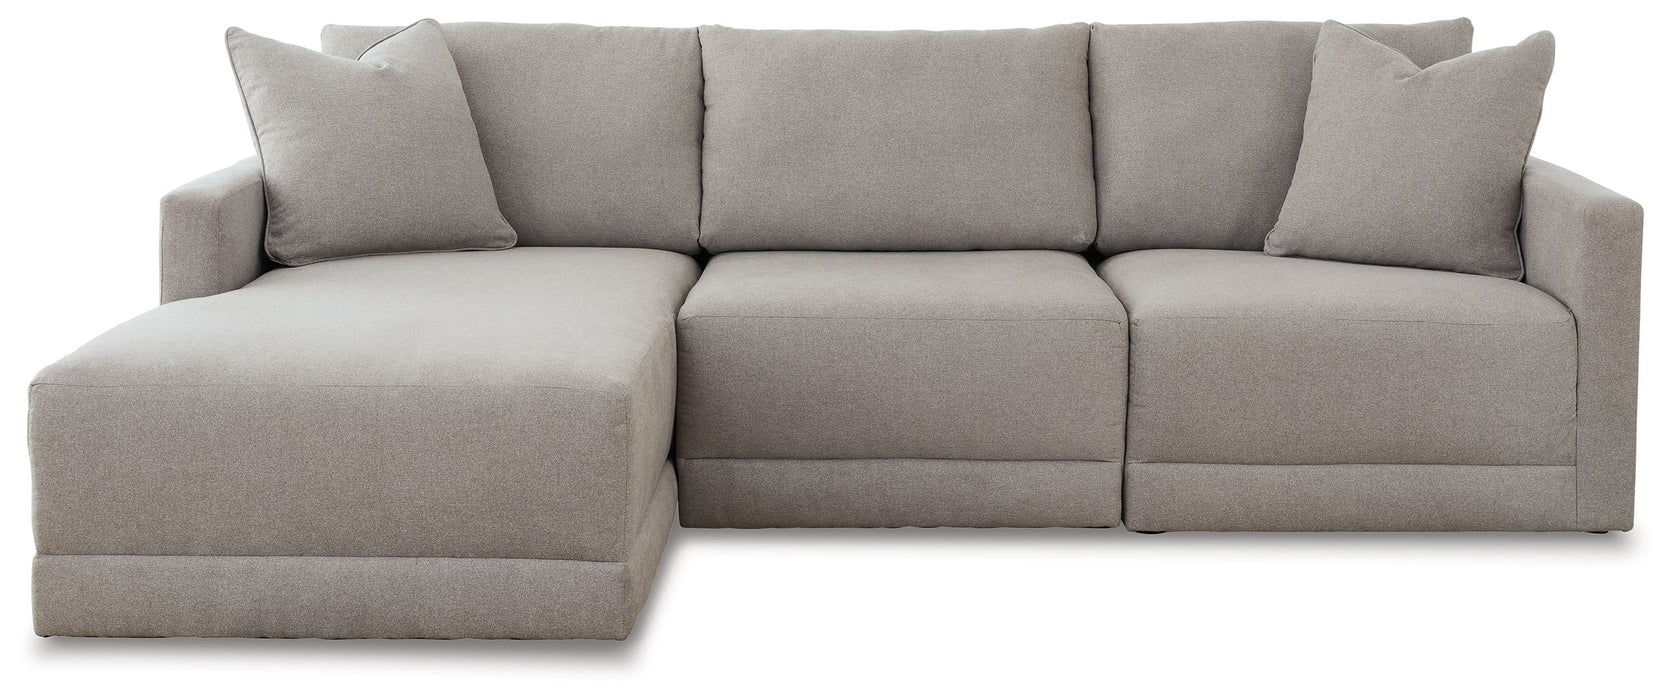 Katany - Sectional Capital Discount Furniture Home Furniture, Furniture Store